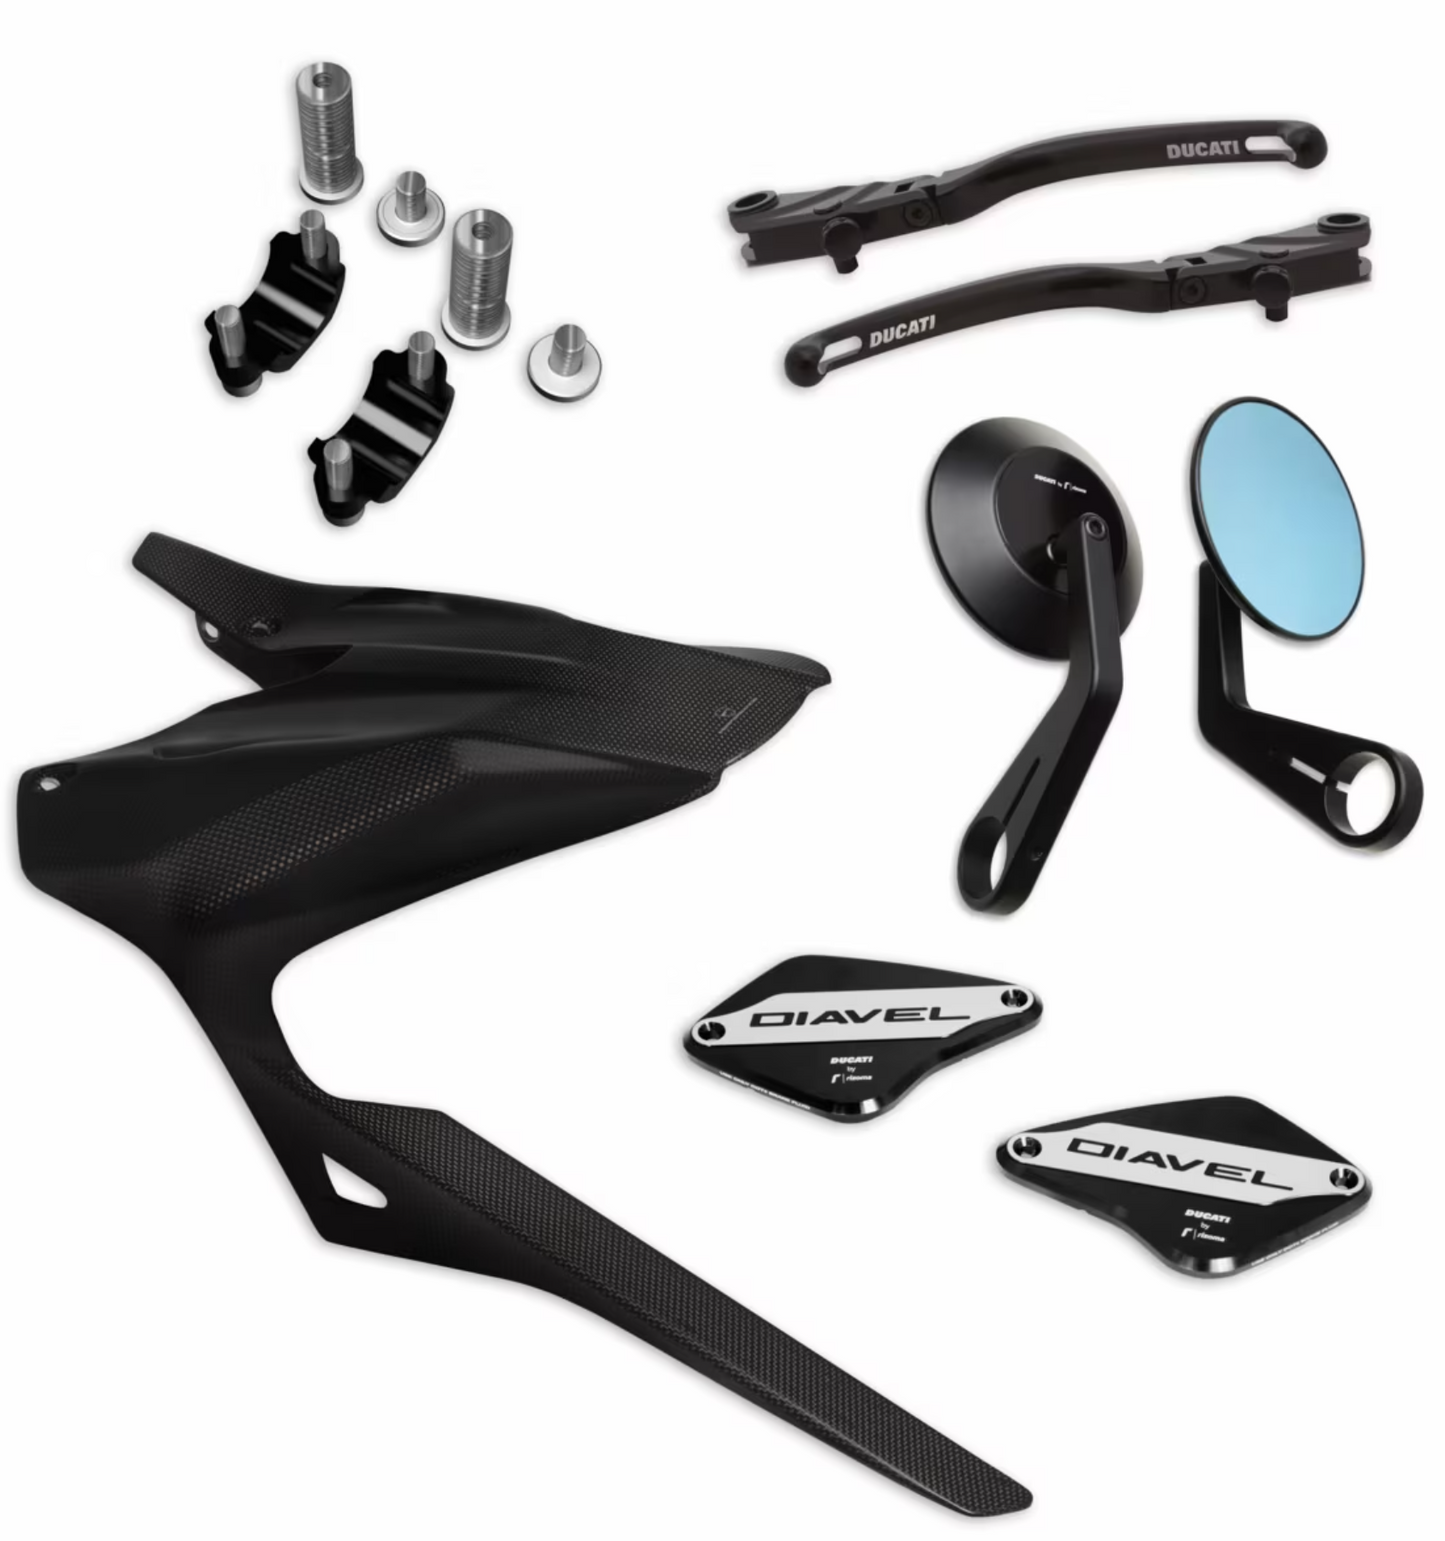 DUCATI Diavel V4 Style Accessory Package 97981311AA 